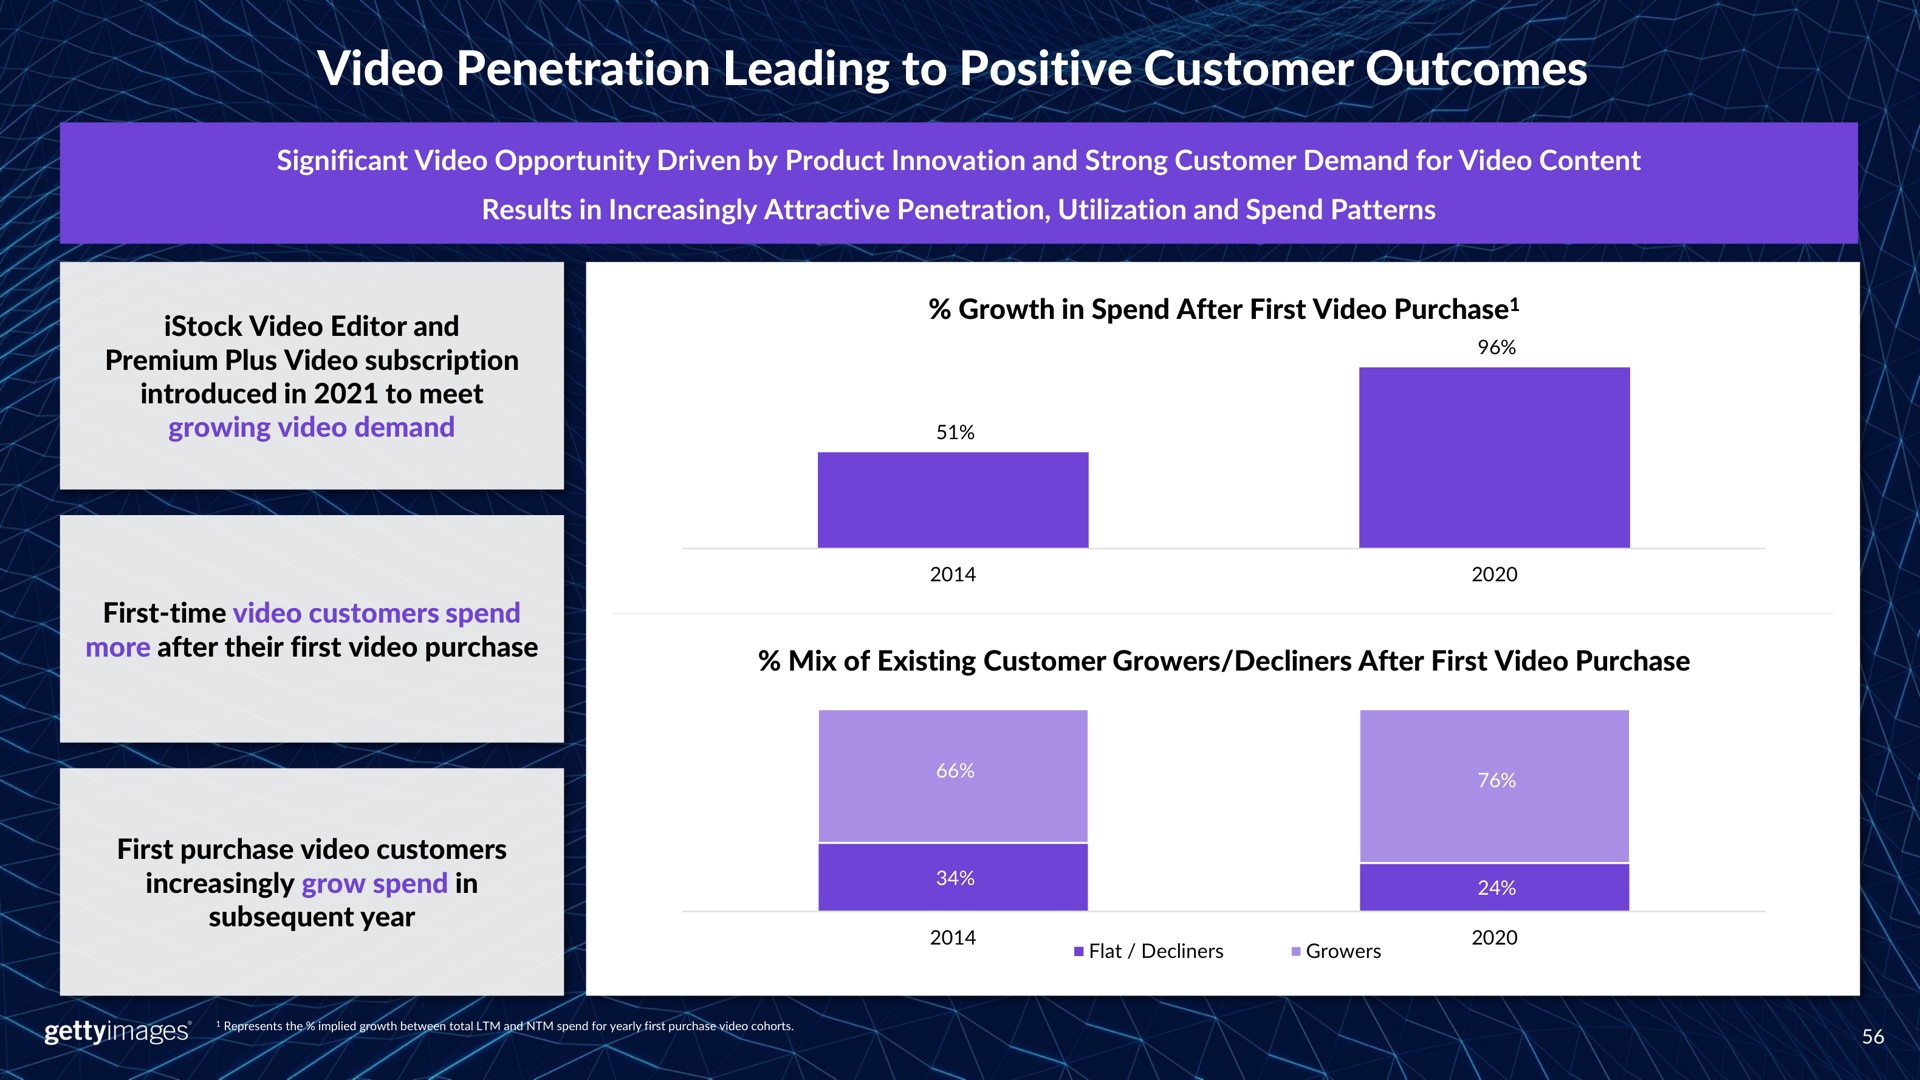 video penetration leading to positive customer outcomes | Getty